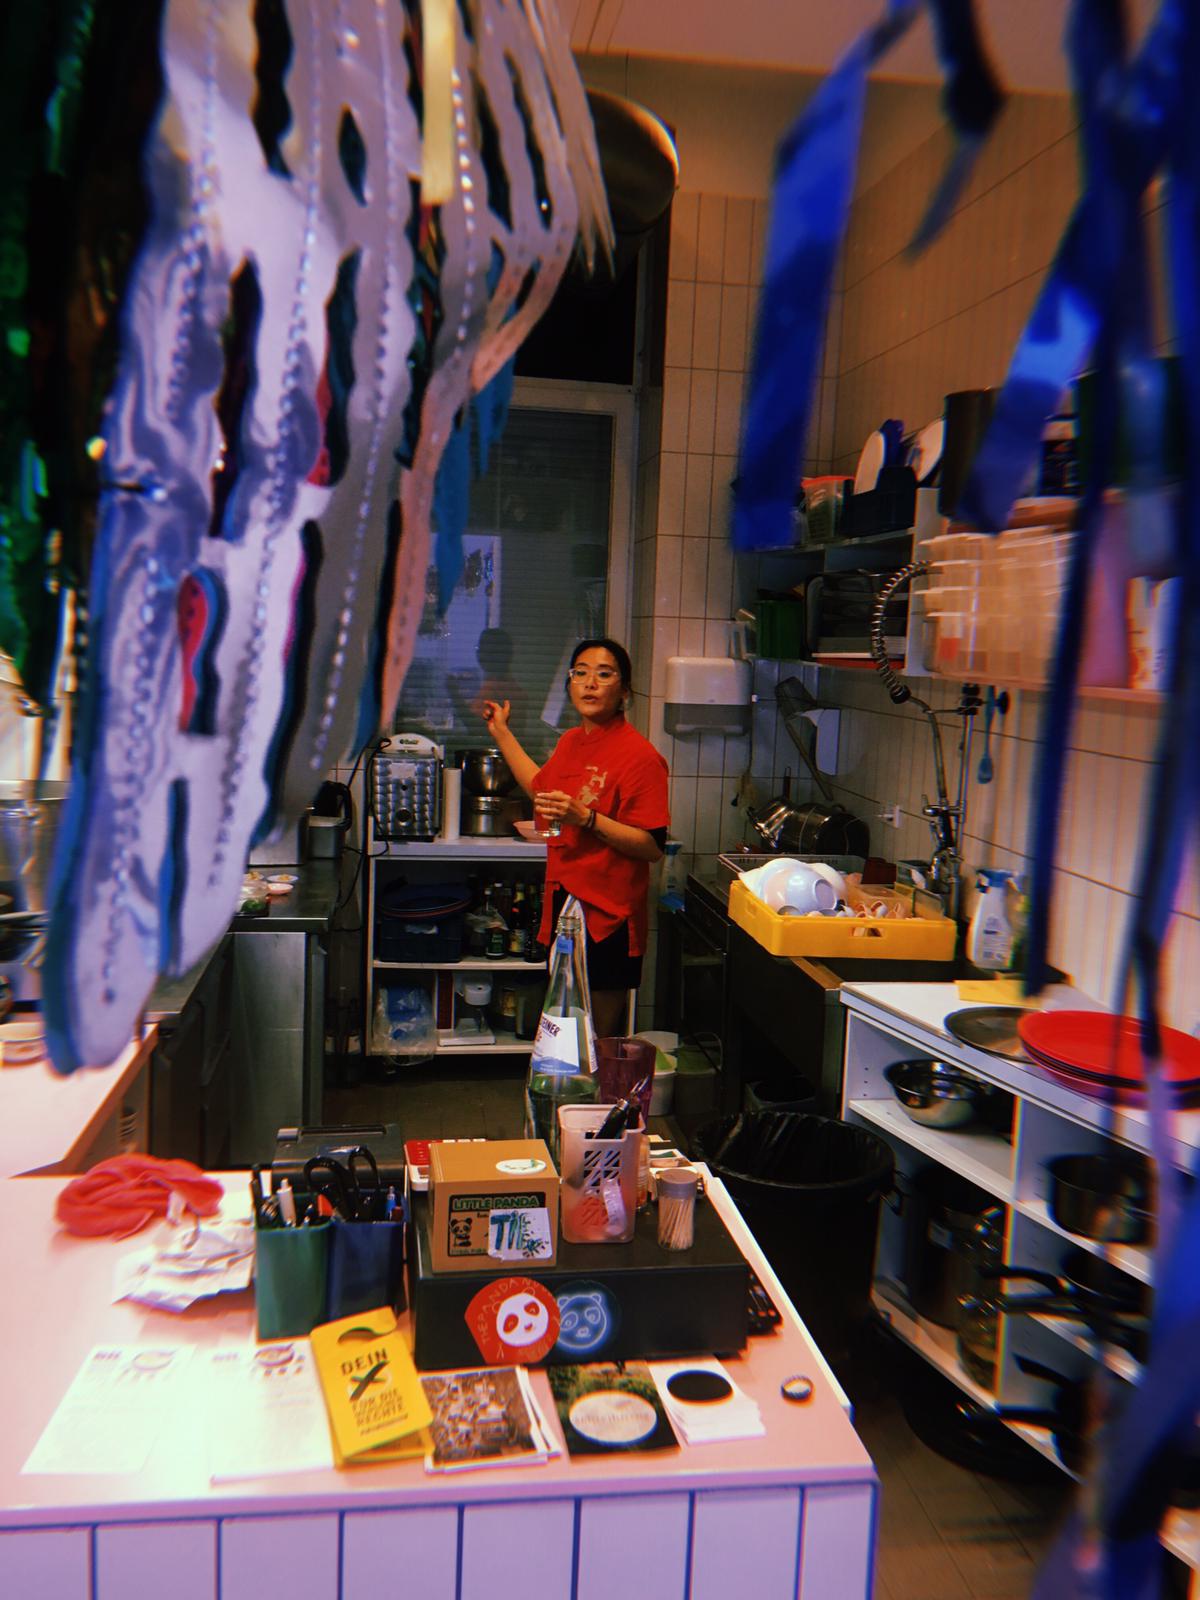 Vicky is wearing a red t-shirt and standing in the kitchen of the Pandanoodle store. People can still see the colorful garlands. The photo was taken during Rise is Life pop-up on 19.05.2019.